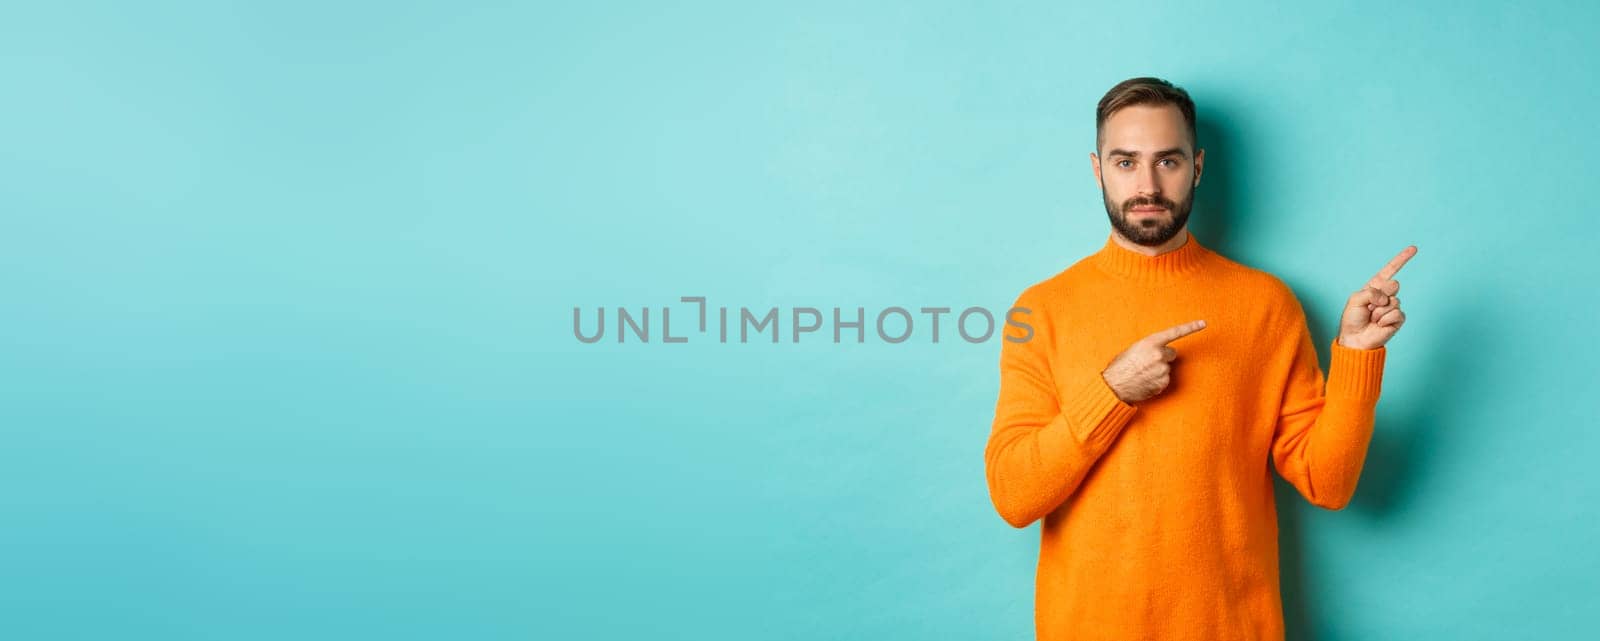 Handsome and serious bearded man in orange sweater pointing right, showing advertisement or logo, standing over turquoise background.